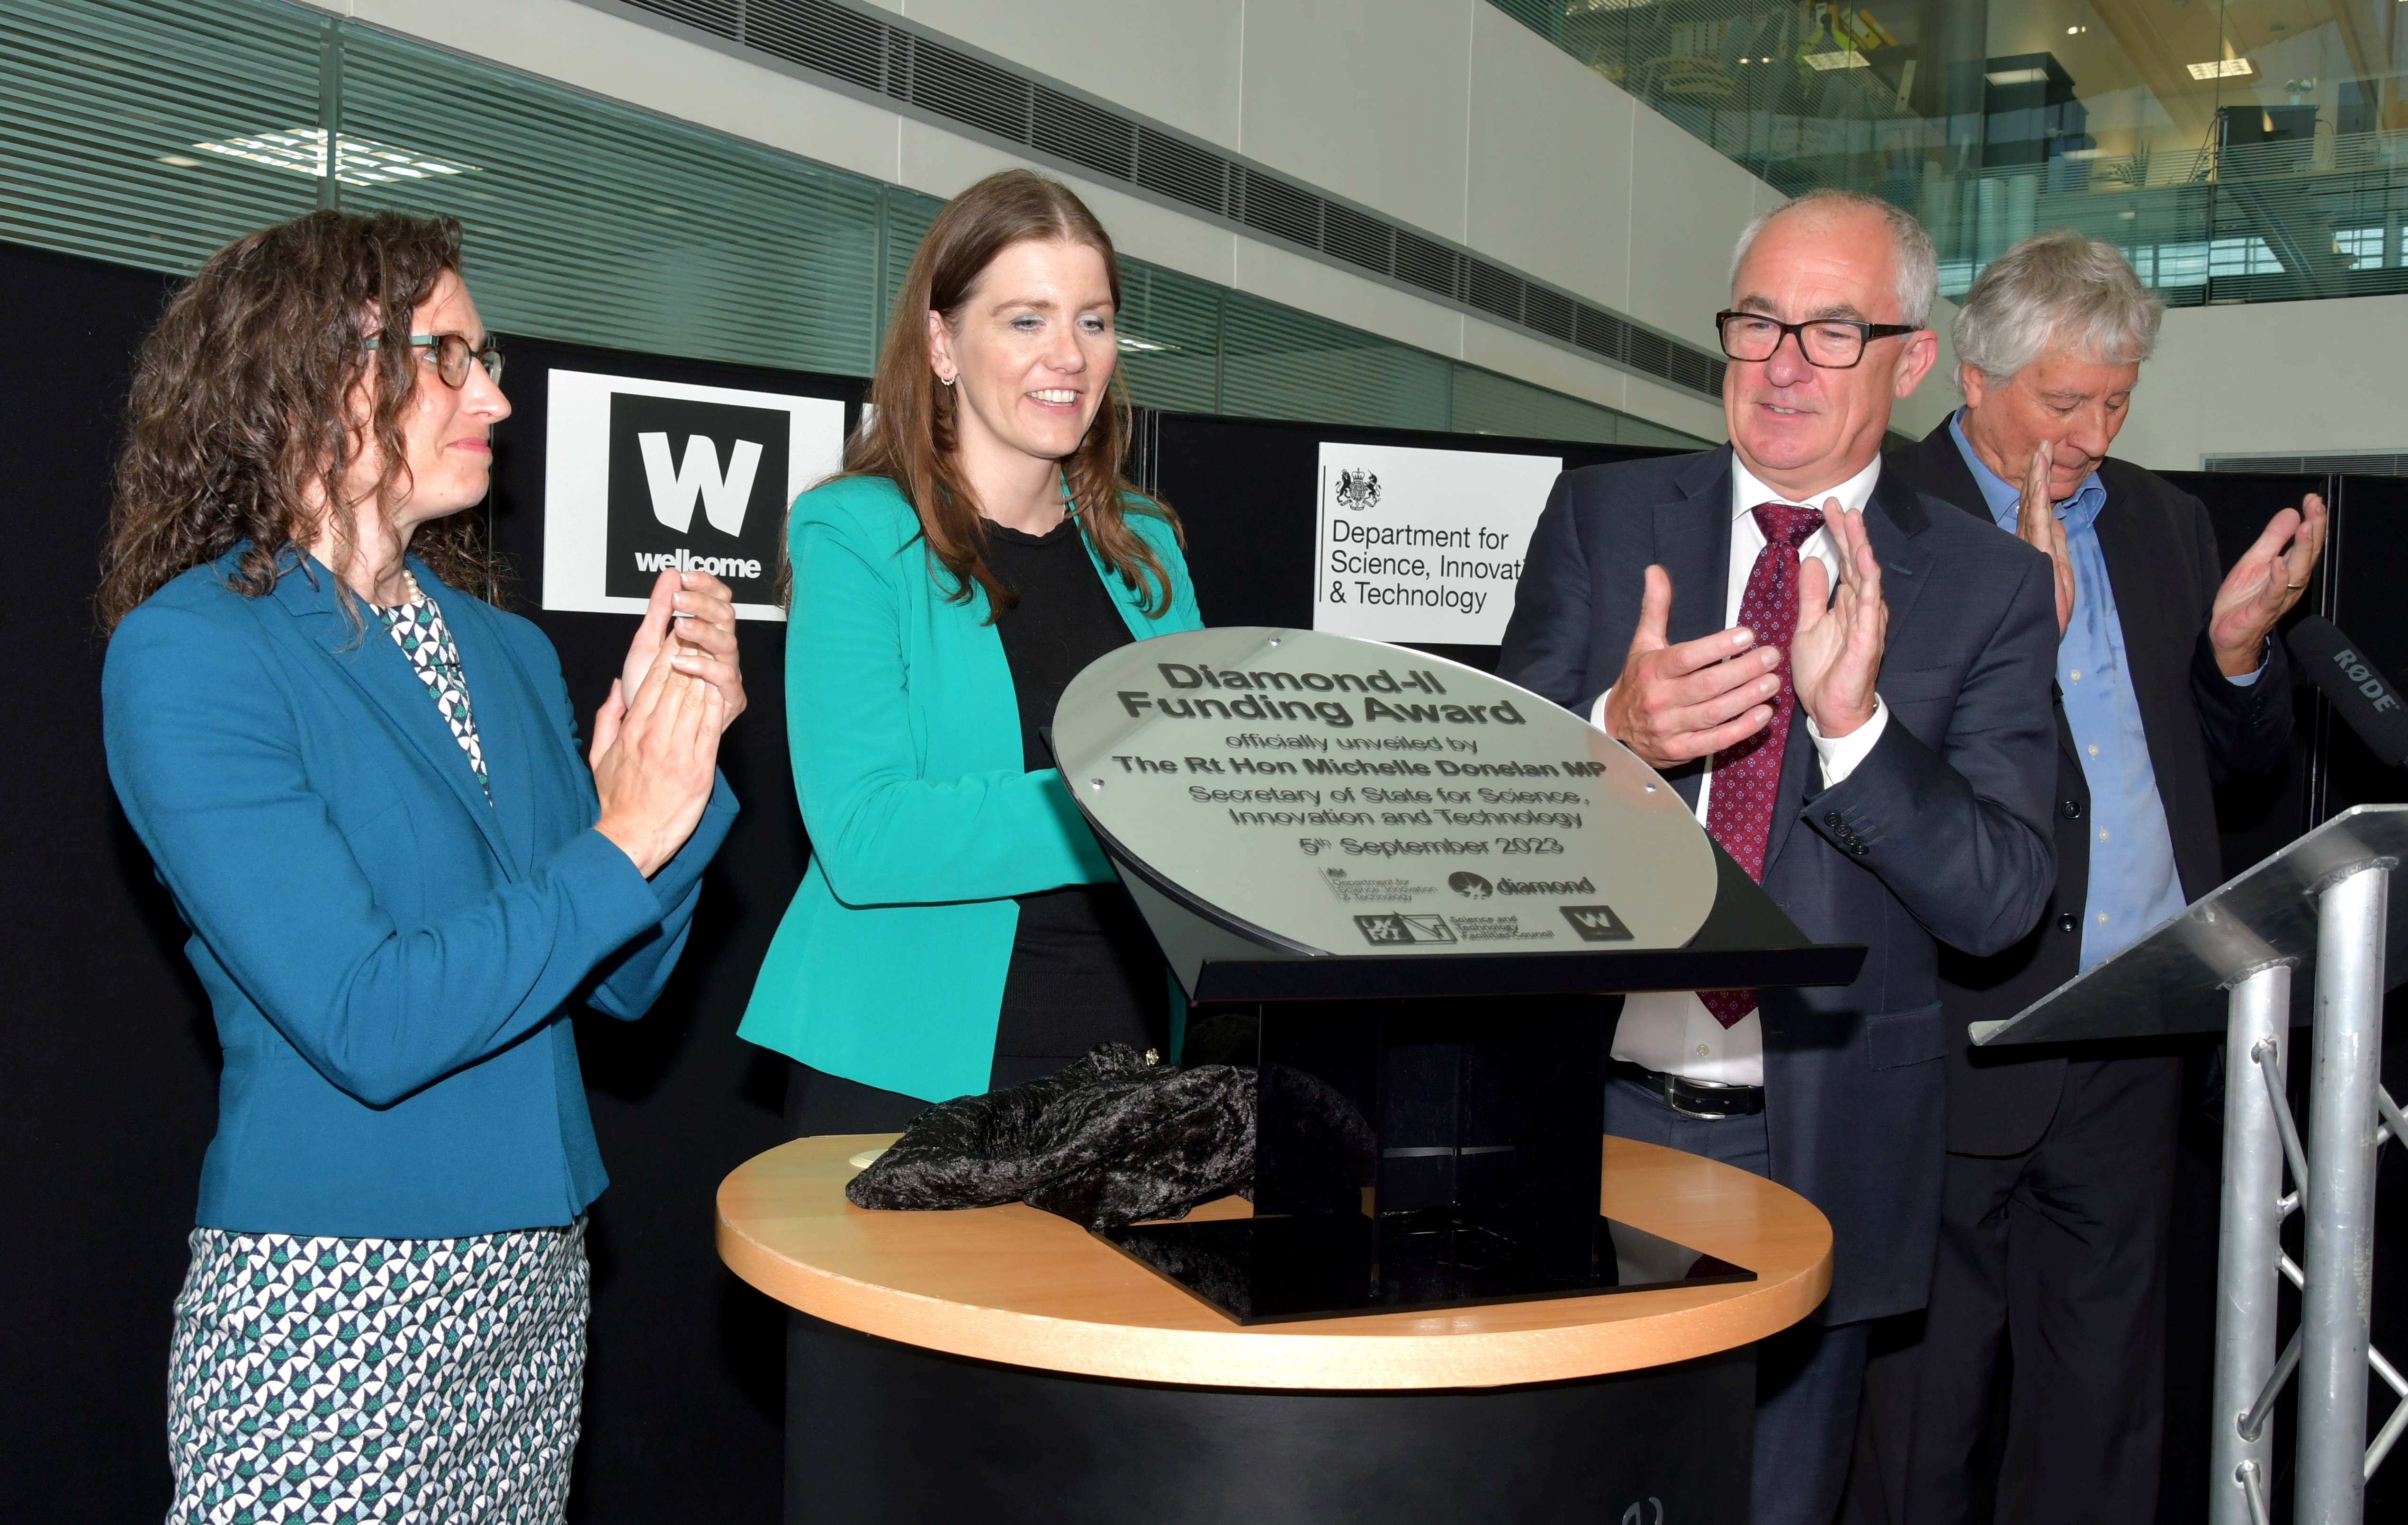 The celebratory plaque for the funding announcement for Diamond-II is unveiled.<br/>L to R: Beth Thompson MBE Chief Strategy Officer at Wellcome, Secretary of State for Science, Innovation and Technology, the Rt Hon Michelle Donelan MP,  Executive Chair of STFC Professor Mark Thomson, and Sir Adrian Smith, Chair of the Board of Diamond